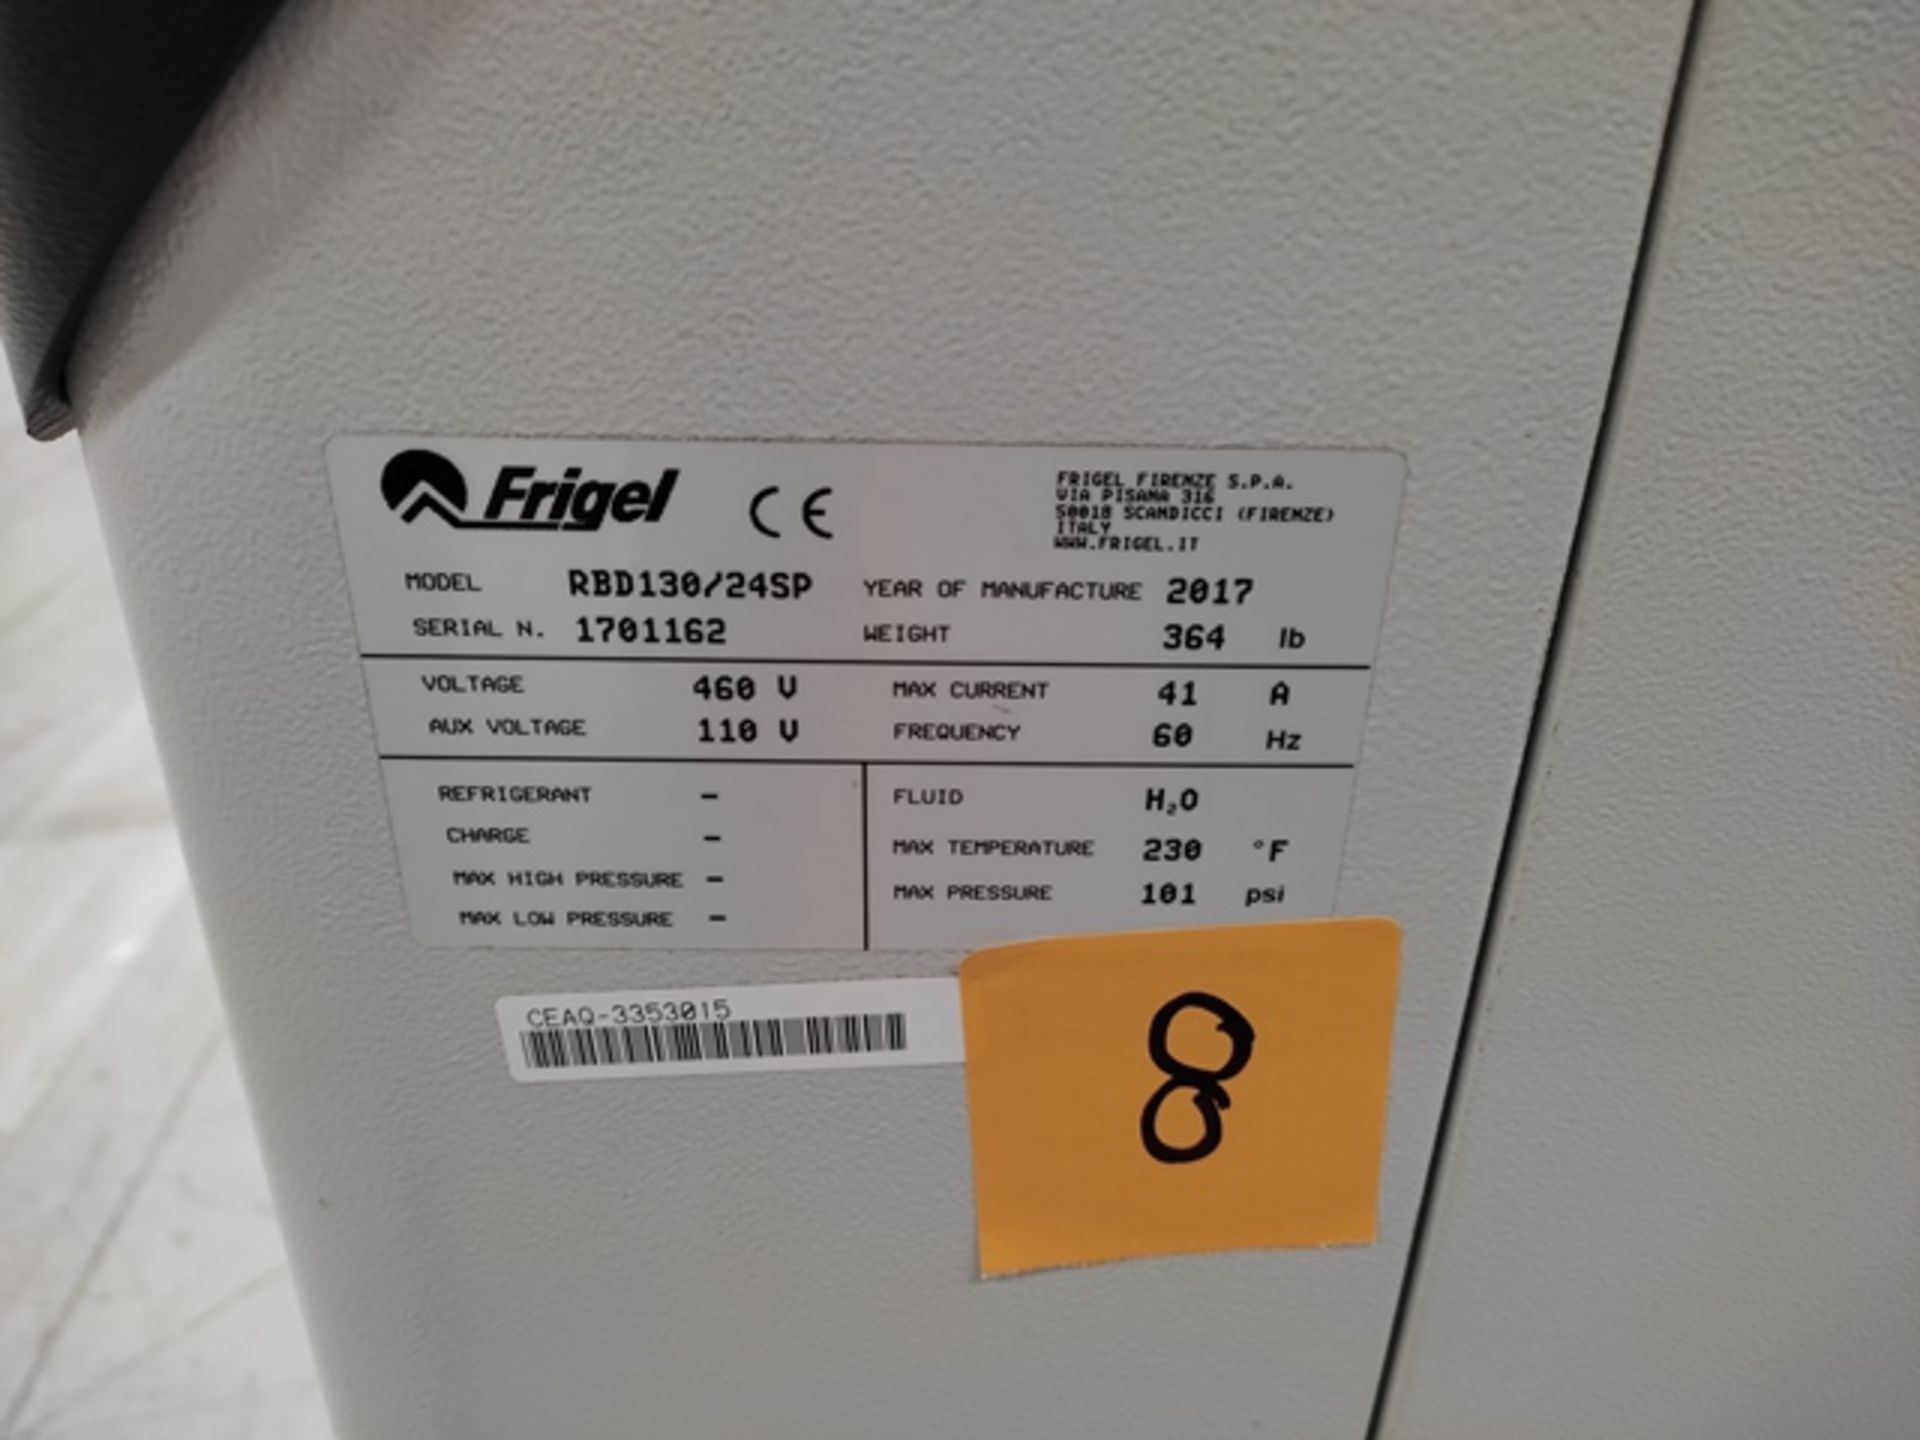 Lot of: (2) Frigel RBD130/24 SP 24 KW Flow Booster Temperature Controllers, Mfg. Year: 2017 - Image 5 of 10